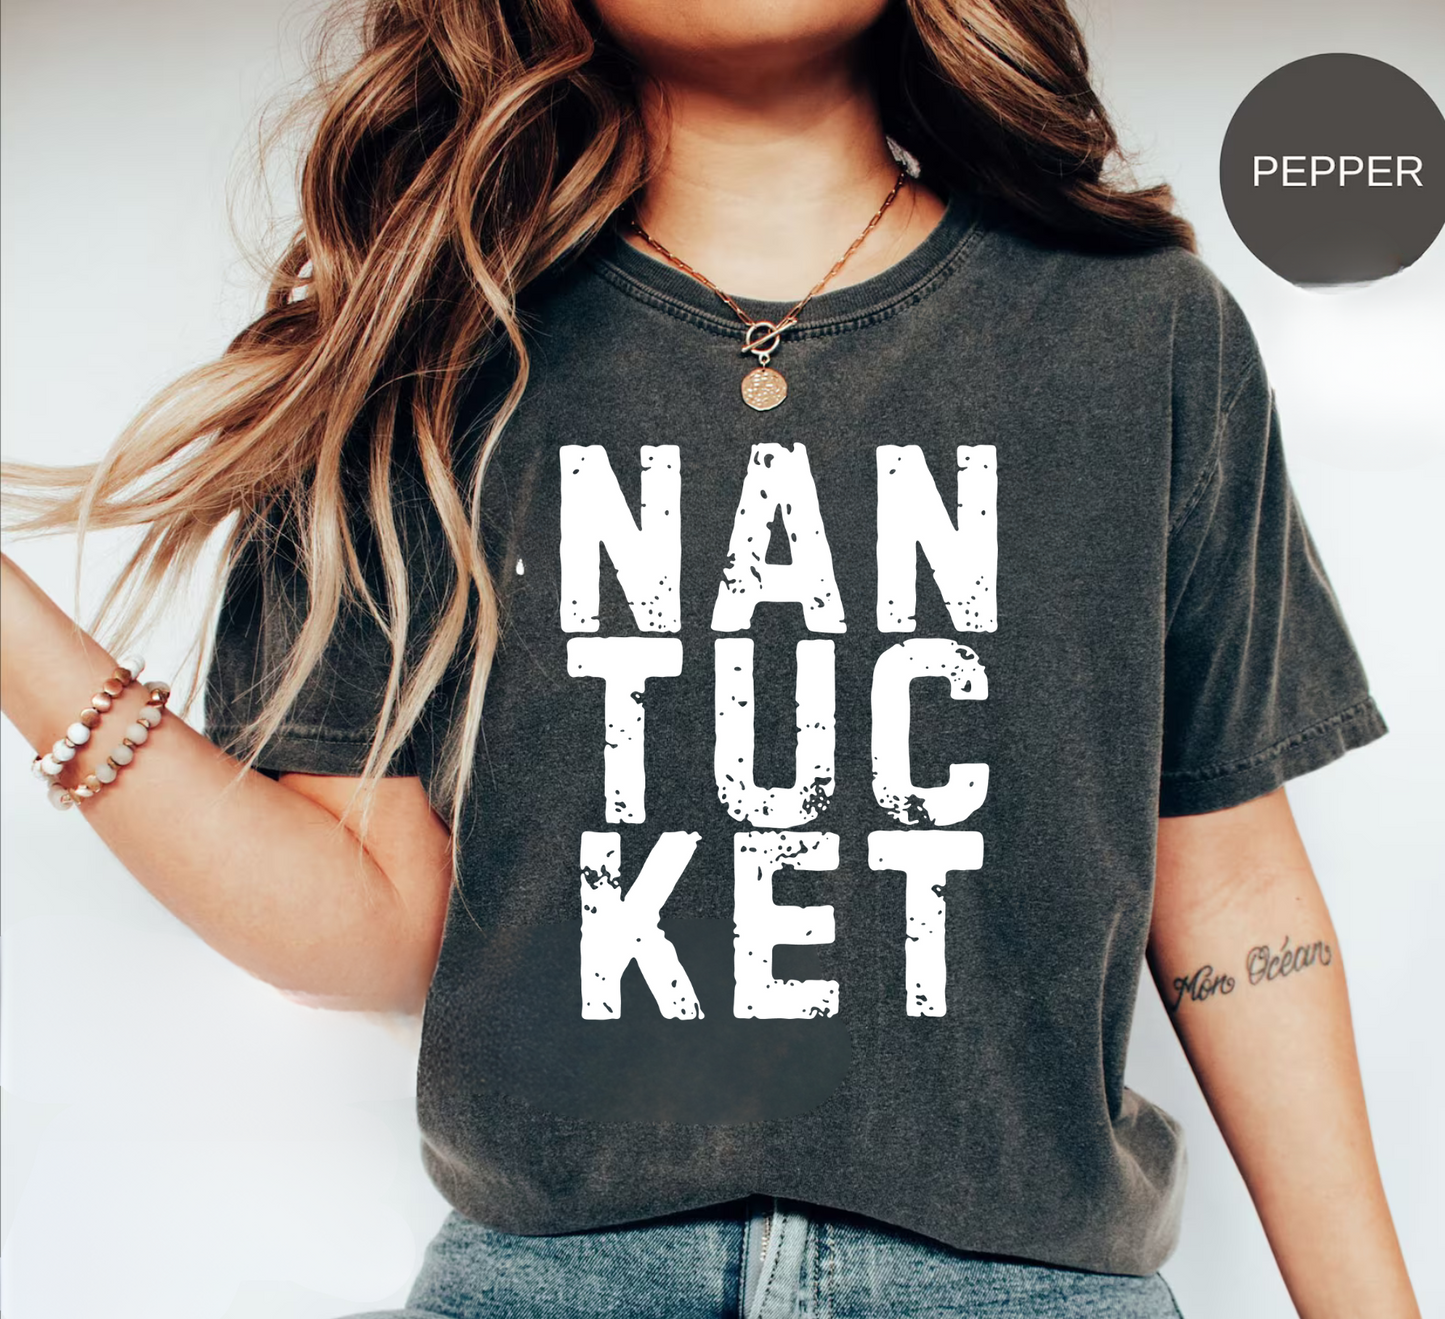 Nantucket T-Shirt - Comfort Colors 1717, 100% Ring-Spun Cotton, Relaxed Fit